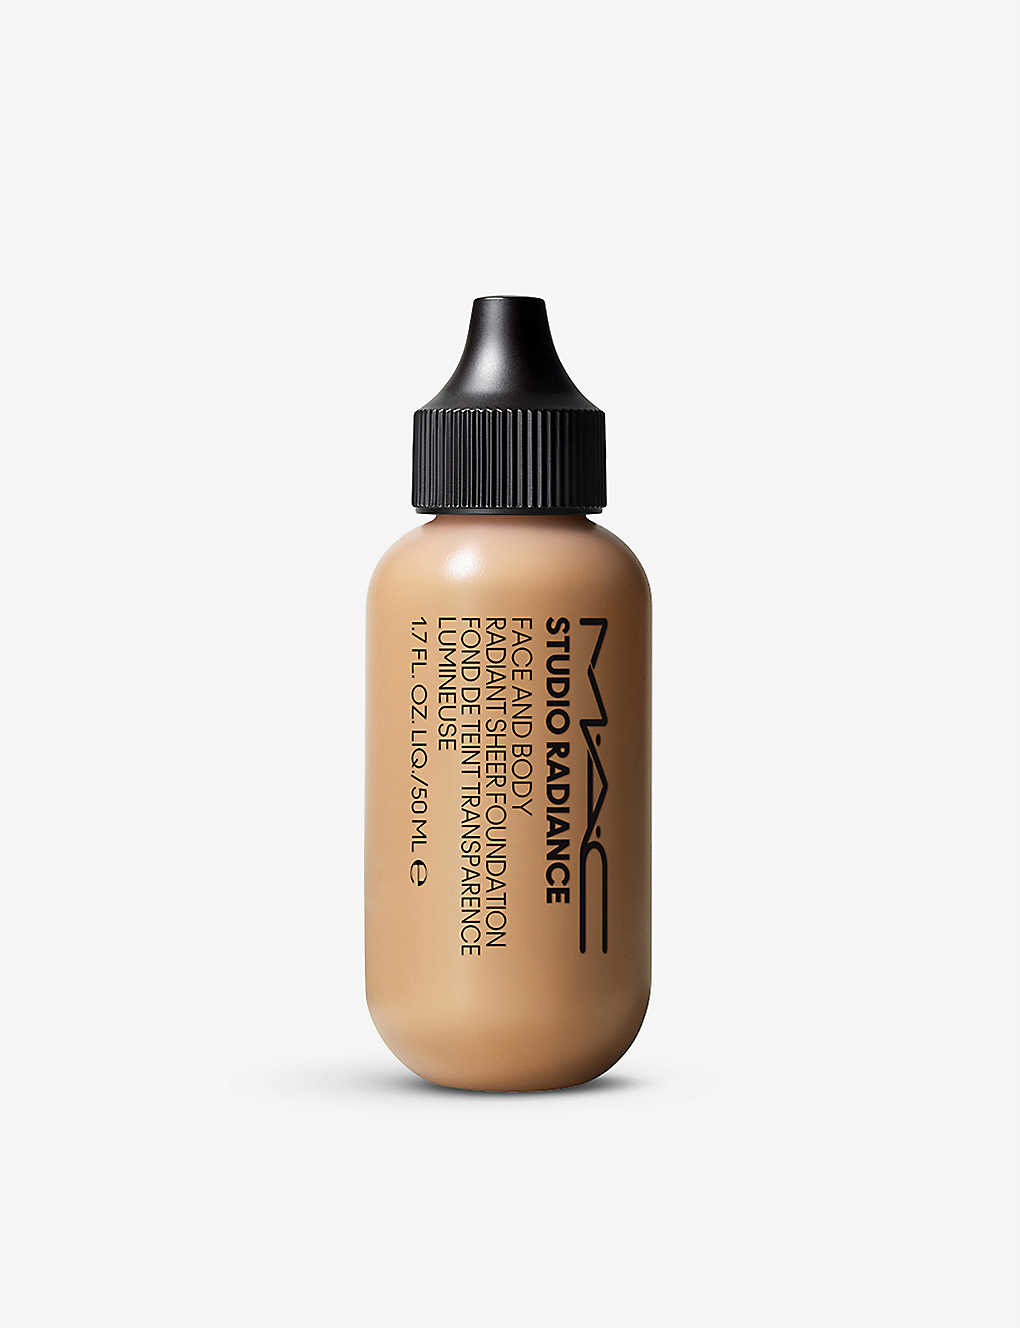 Mac Studio Radiance Face And Body Radiant Sheer Foundation 50ml In C2